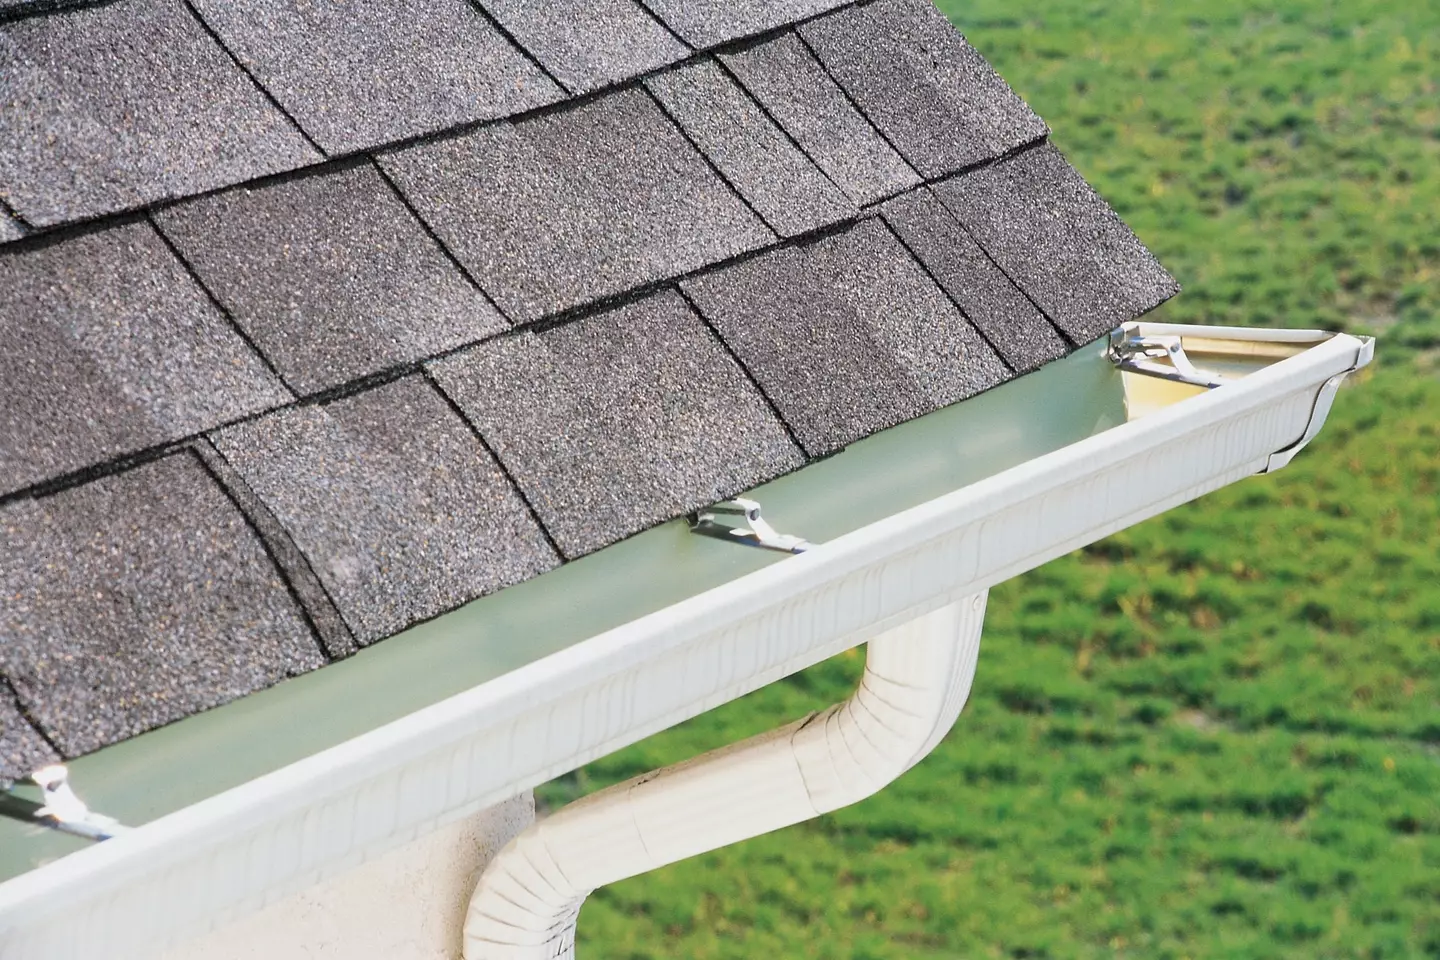 Roofing experts say you should clear out your gutters before winter.